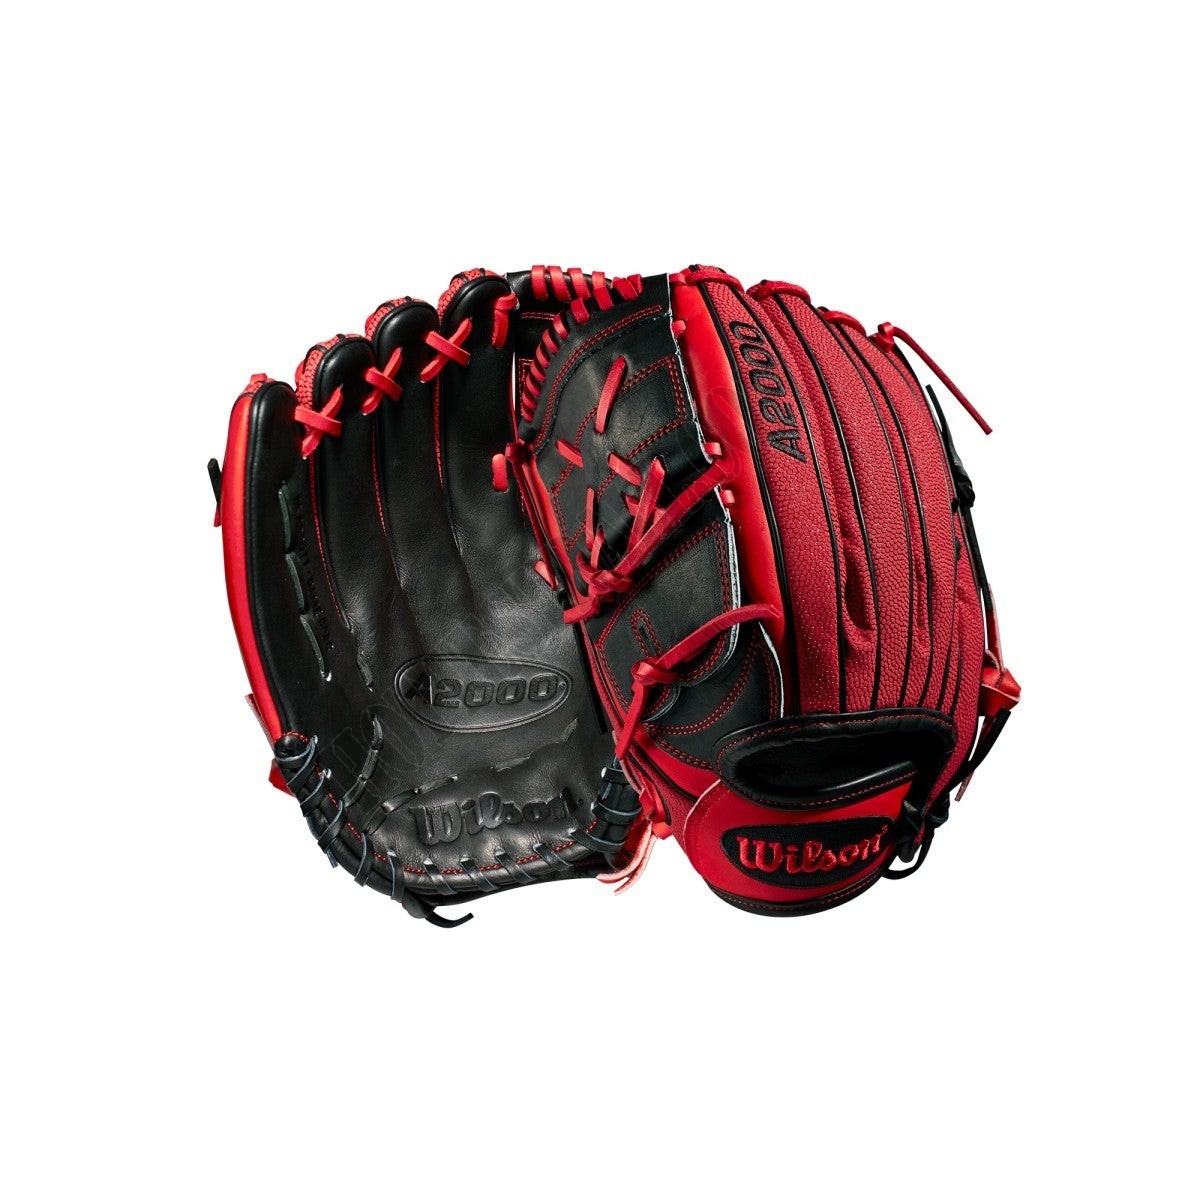 2018 A2000 MA14 SuperSkin GM 12.25" Pitcher's Fastpitch Glove - Left Hand Throw ● Wilson Promotions - -0